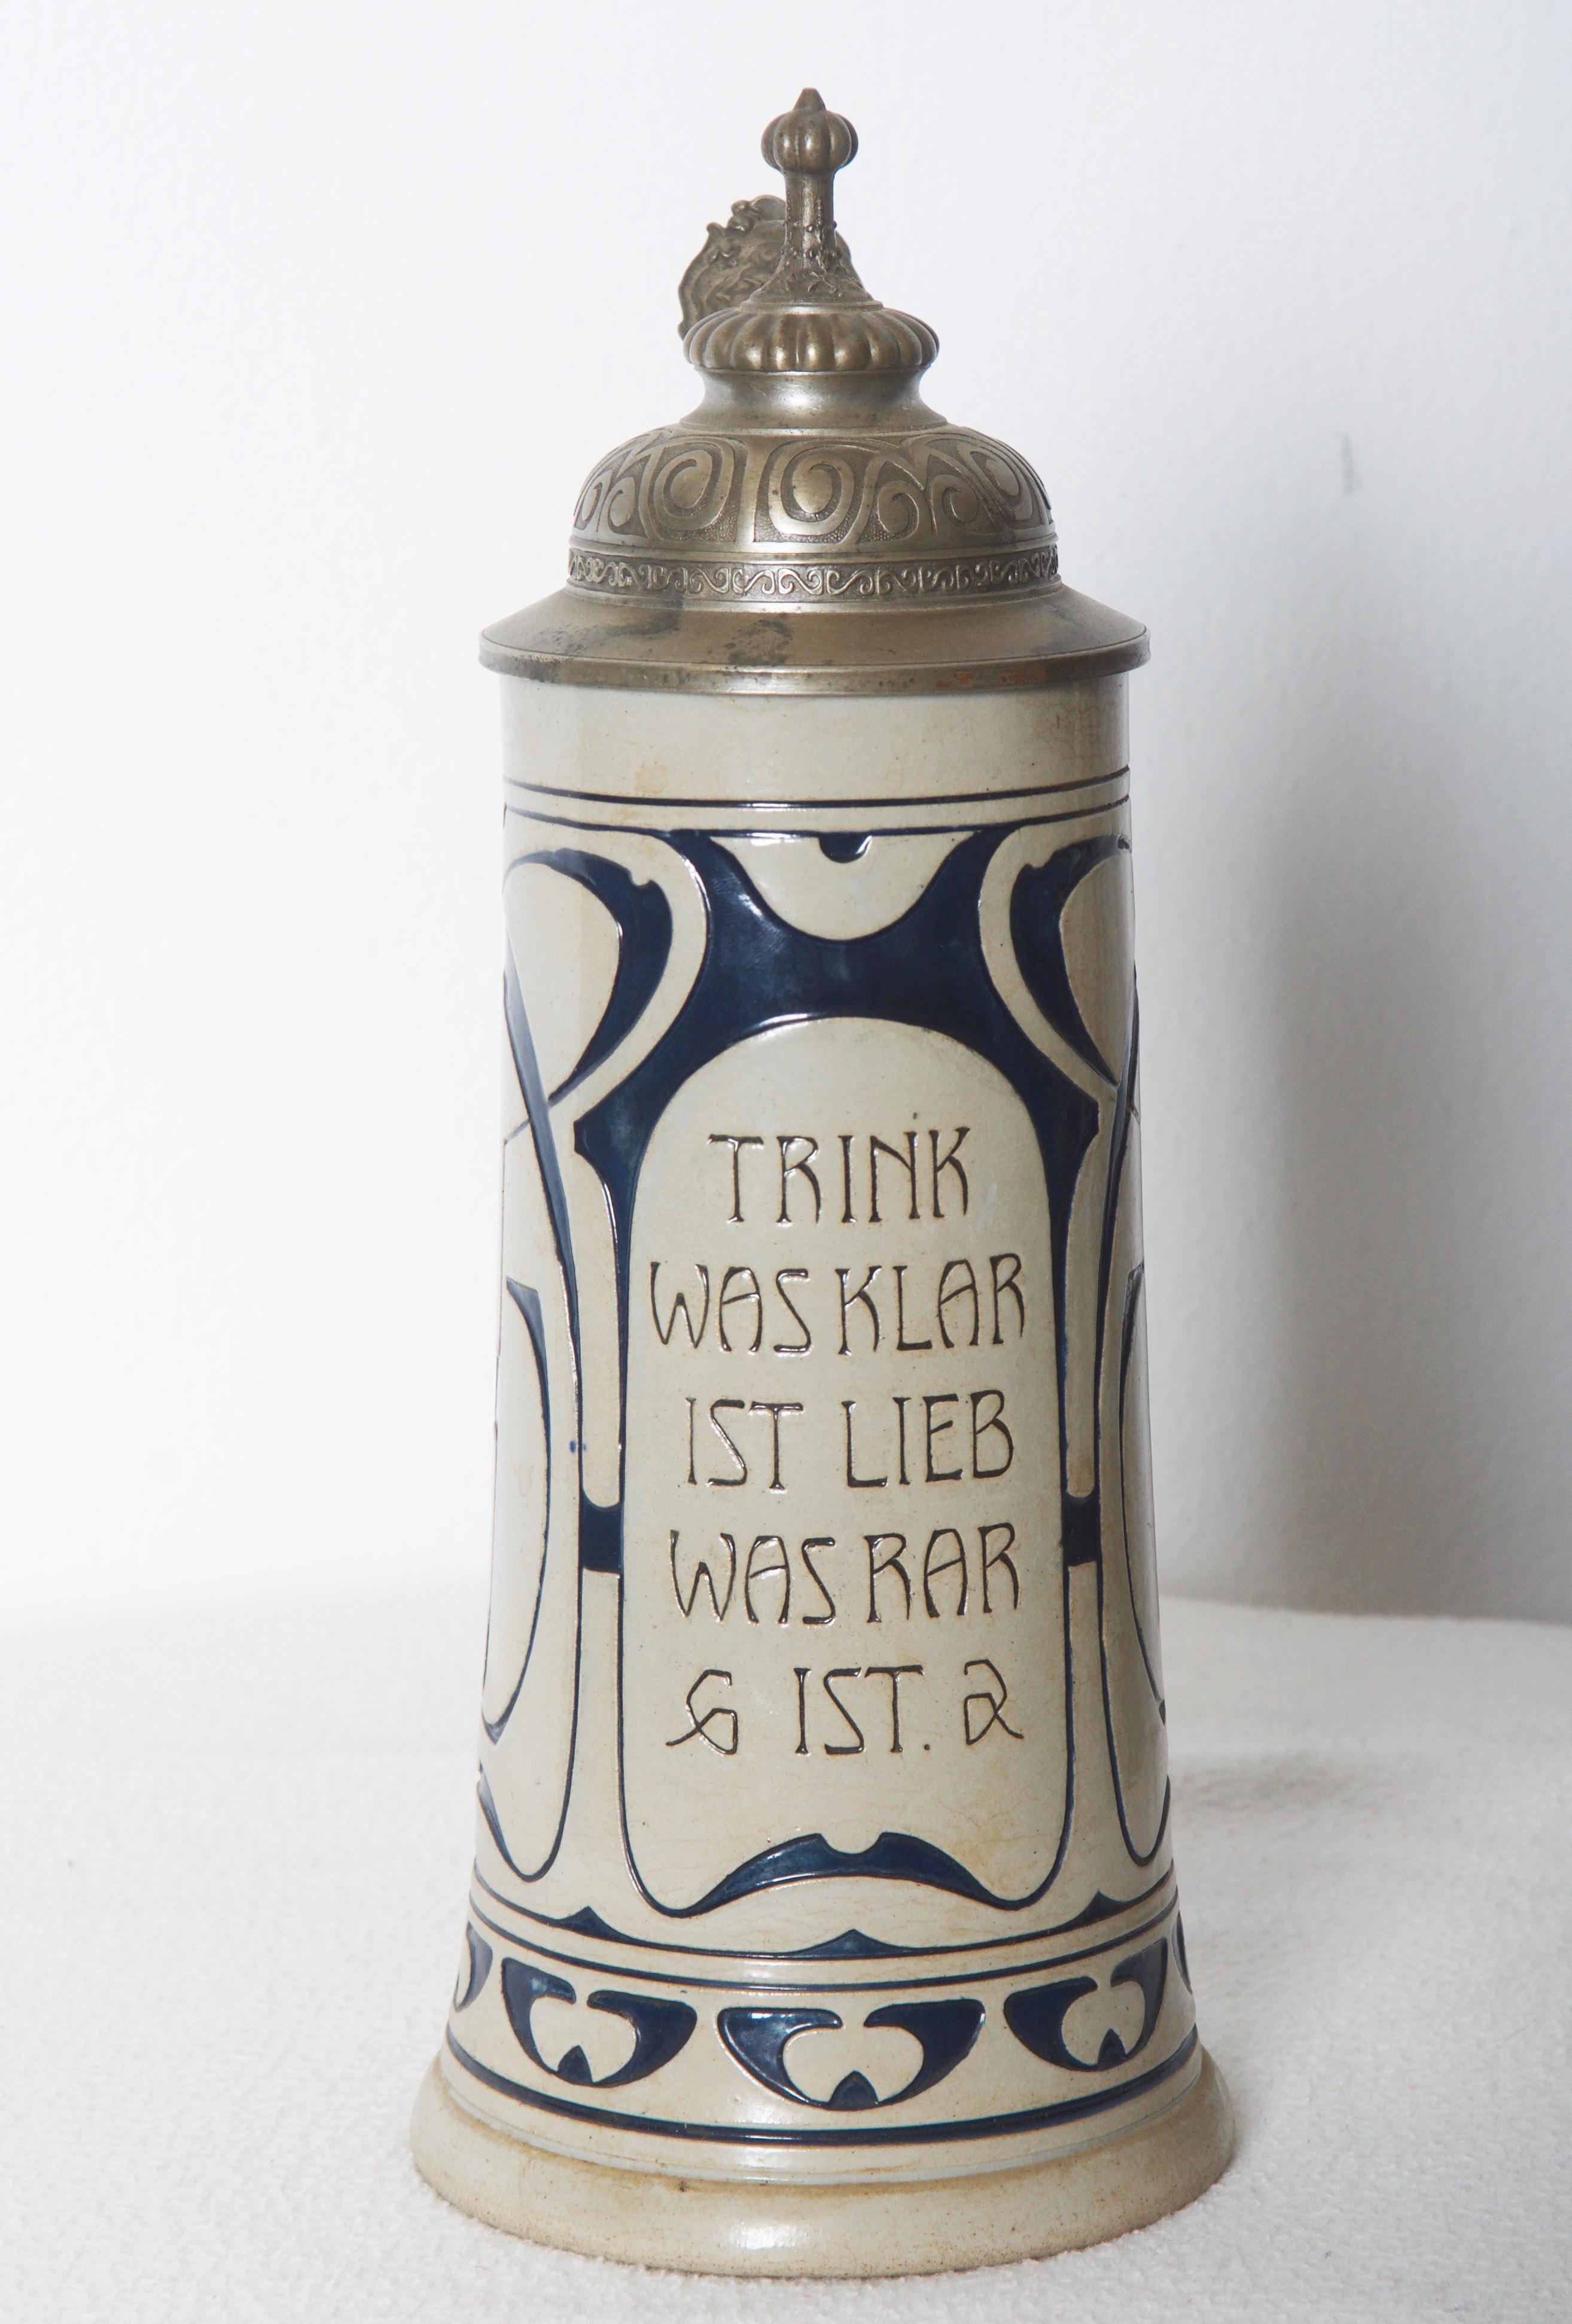 Stoneware 1/2l beer stein with an original pewter hinged lid. The body is decorated with a floral Art Nouveau ornaments.
Made in Germany.